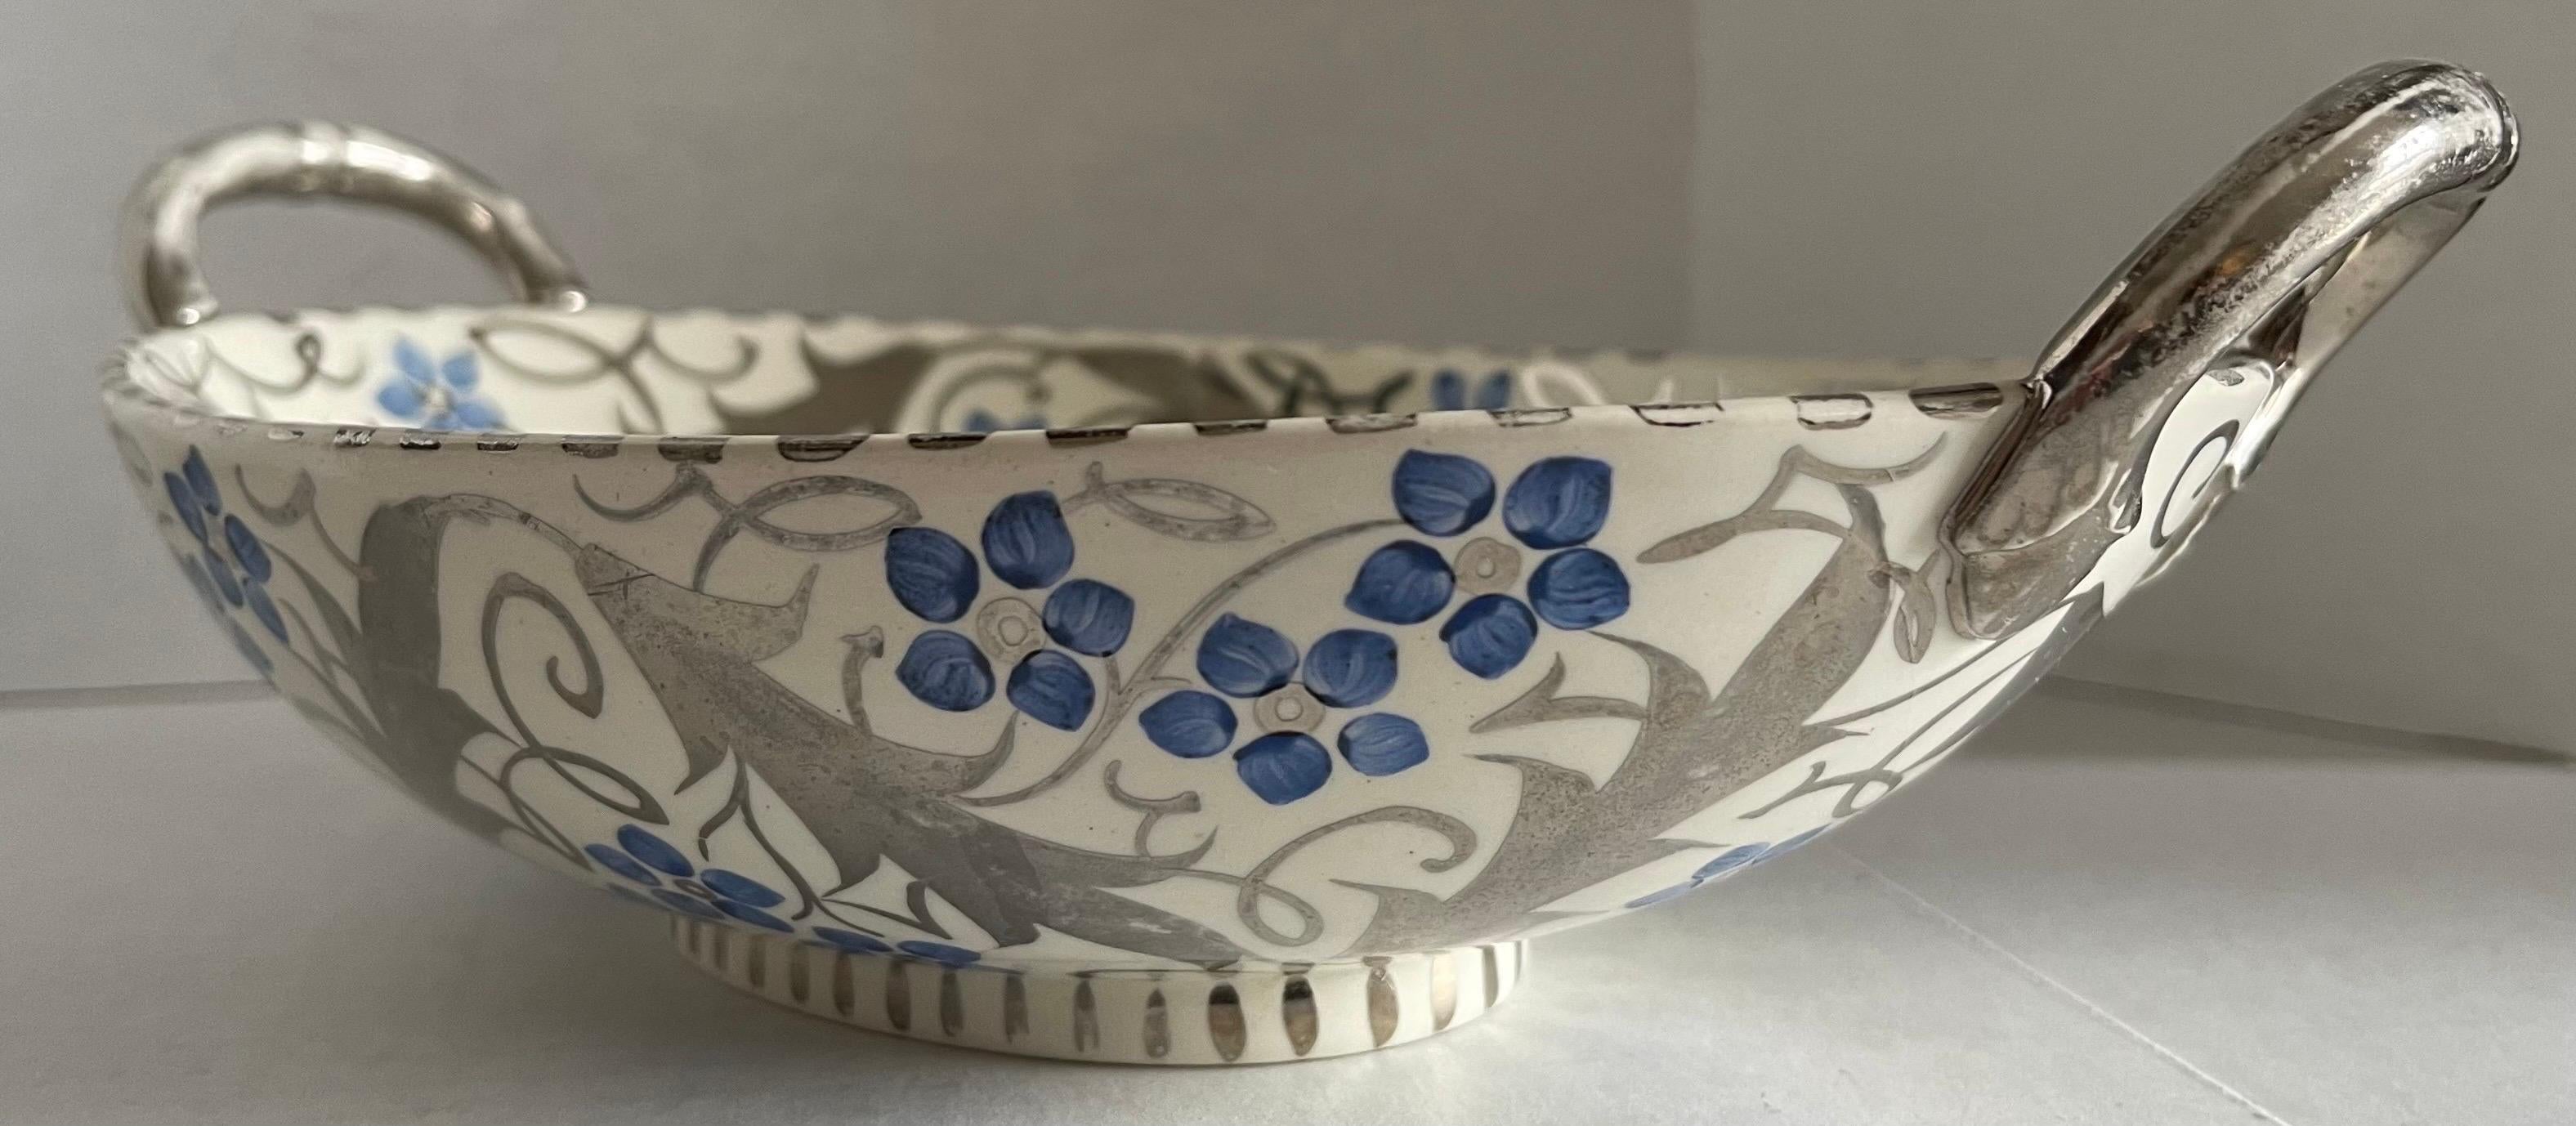 Mid-20th Century 1930s Wedgwood Lustreware Basket For Sale